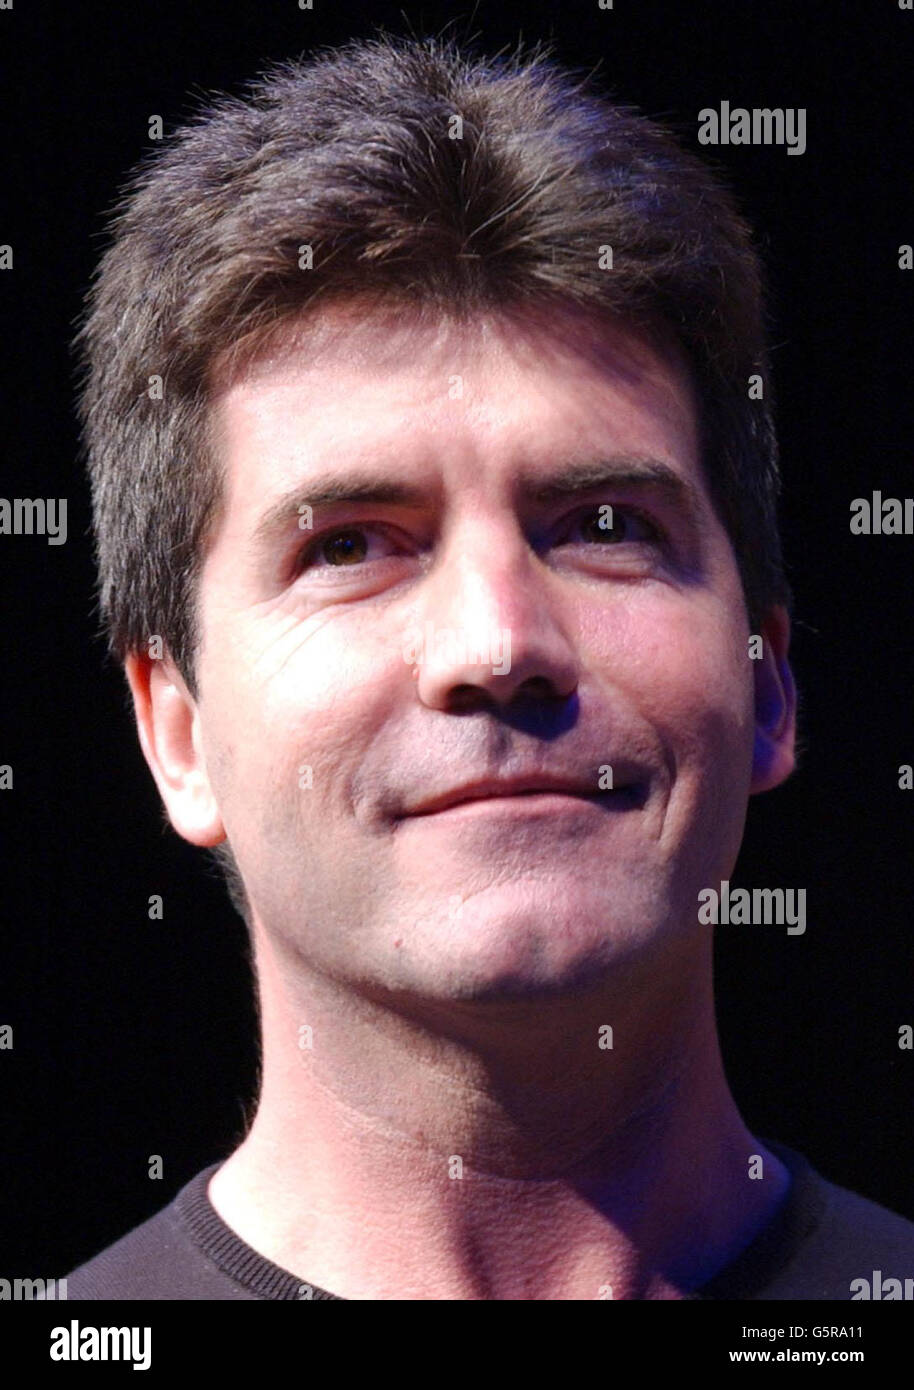 Pop Idol judge Simon Cowell attending the 2002 TRIC (Television & Radio Industries Club) Awards at the Le Meridien Grosvenor House Hotel in London. Stock Photo